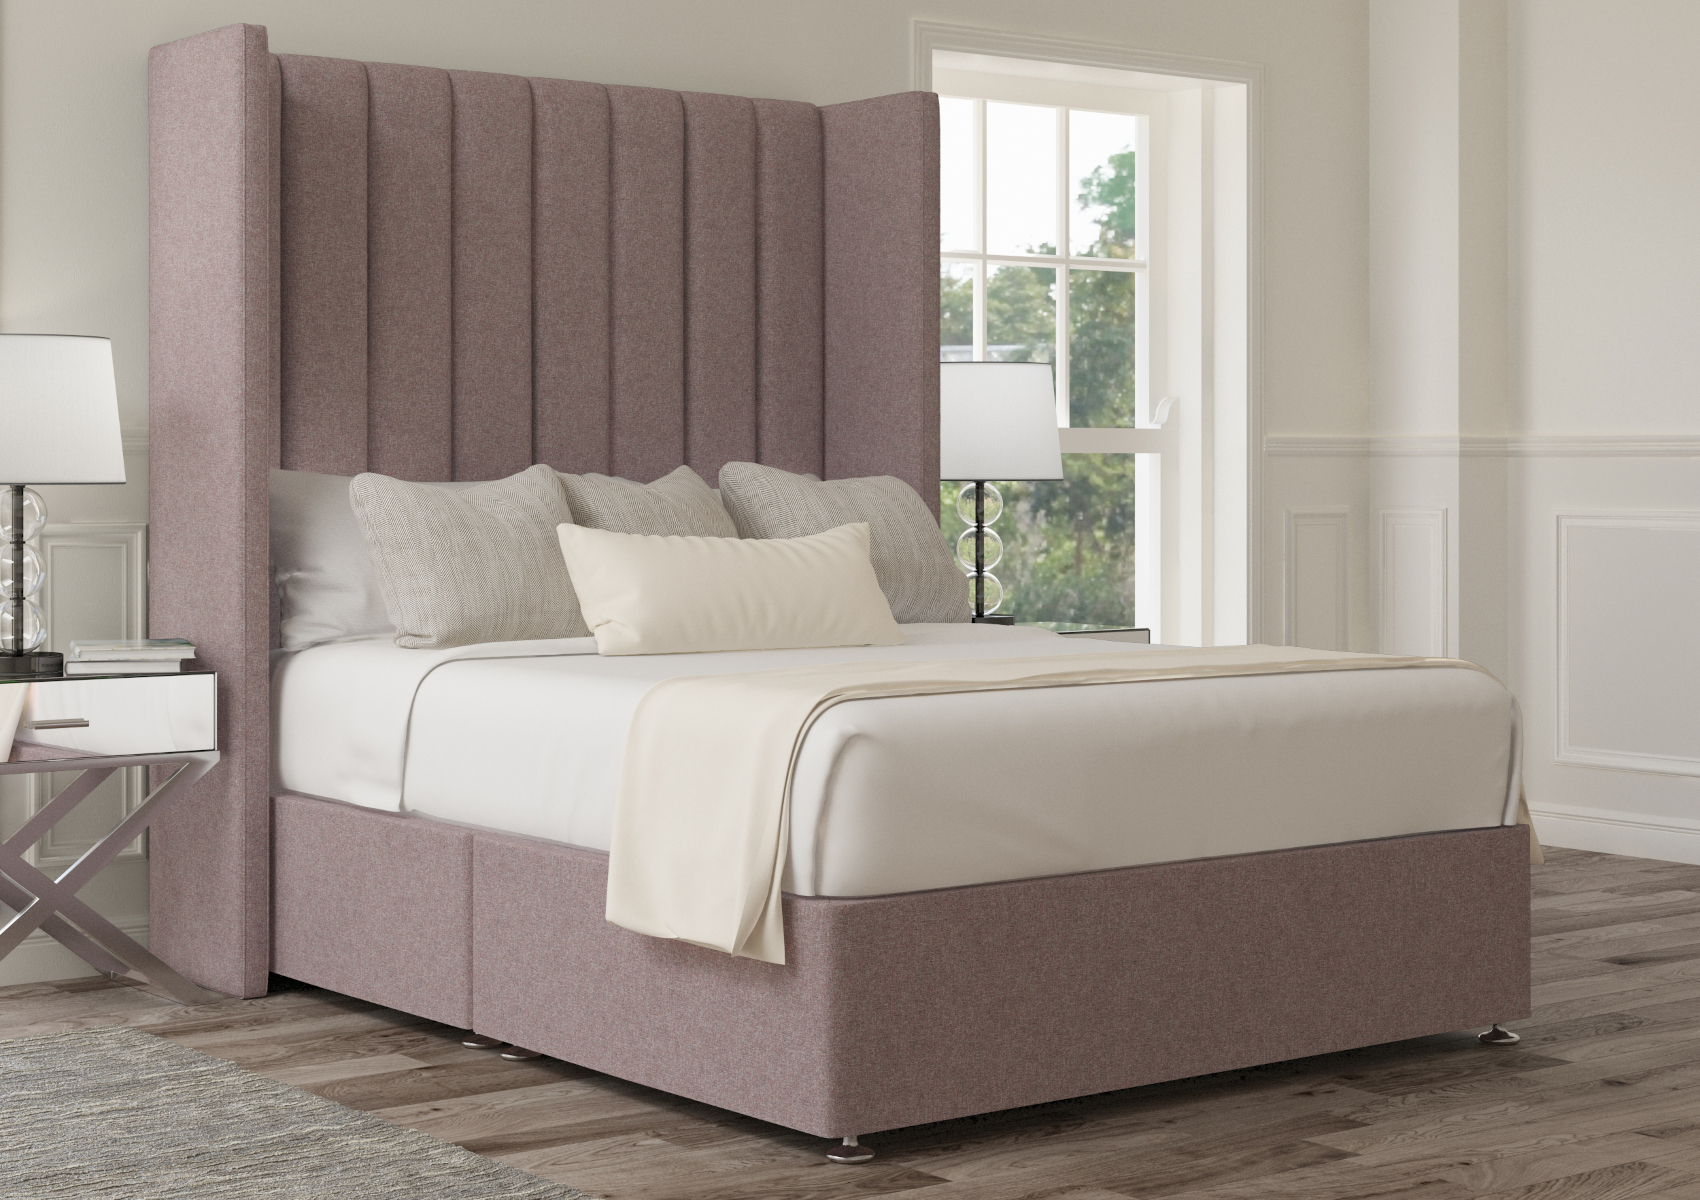 View Lola Hugo Royal Upholstered Double Bed Time4Sleep information